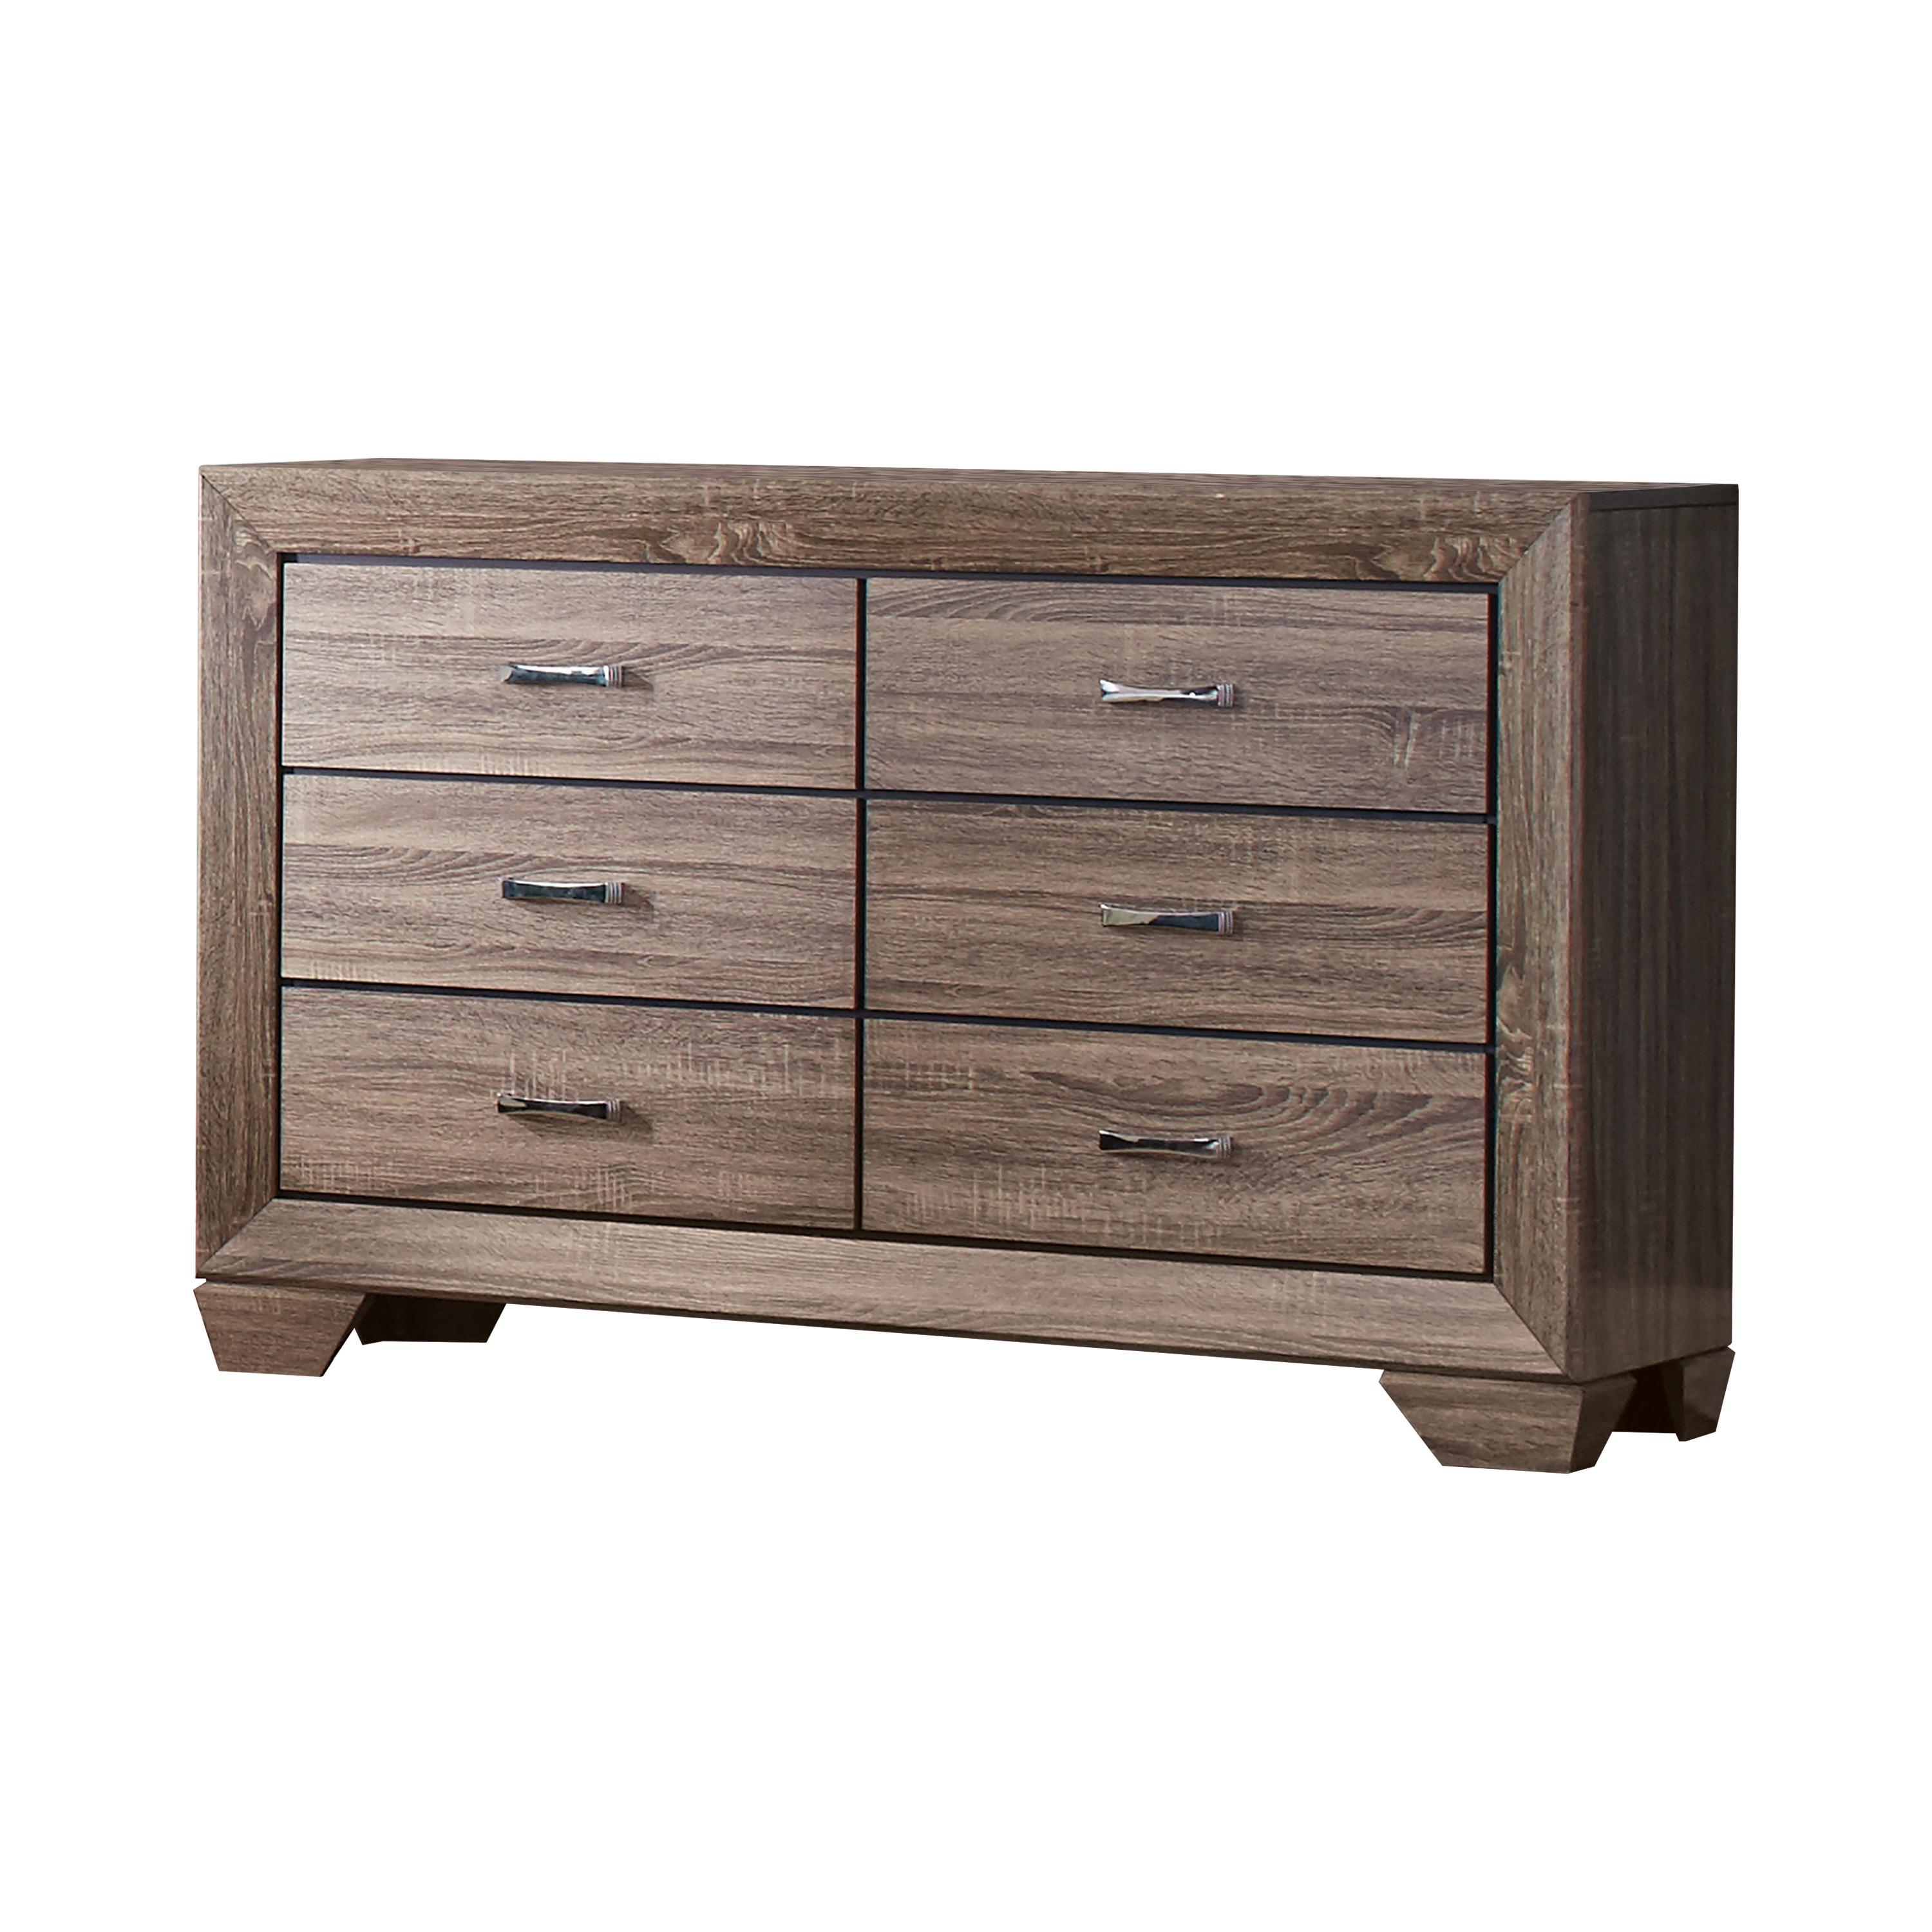 Transitional Dresser 204193 Kauffman 204193 in Taupe 